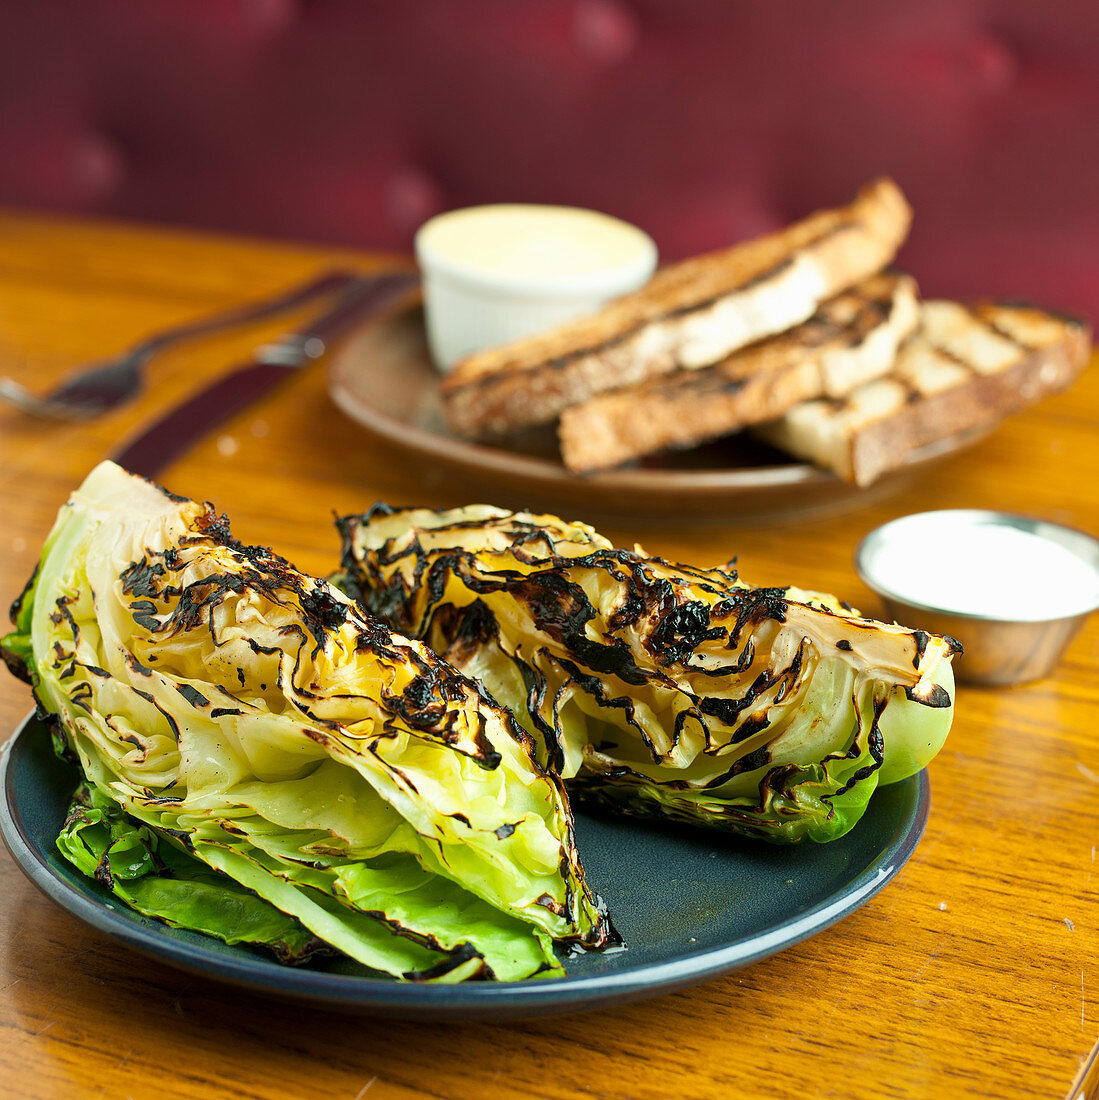 Char grilled lettuce head with toast and butter